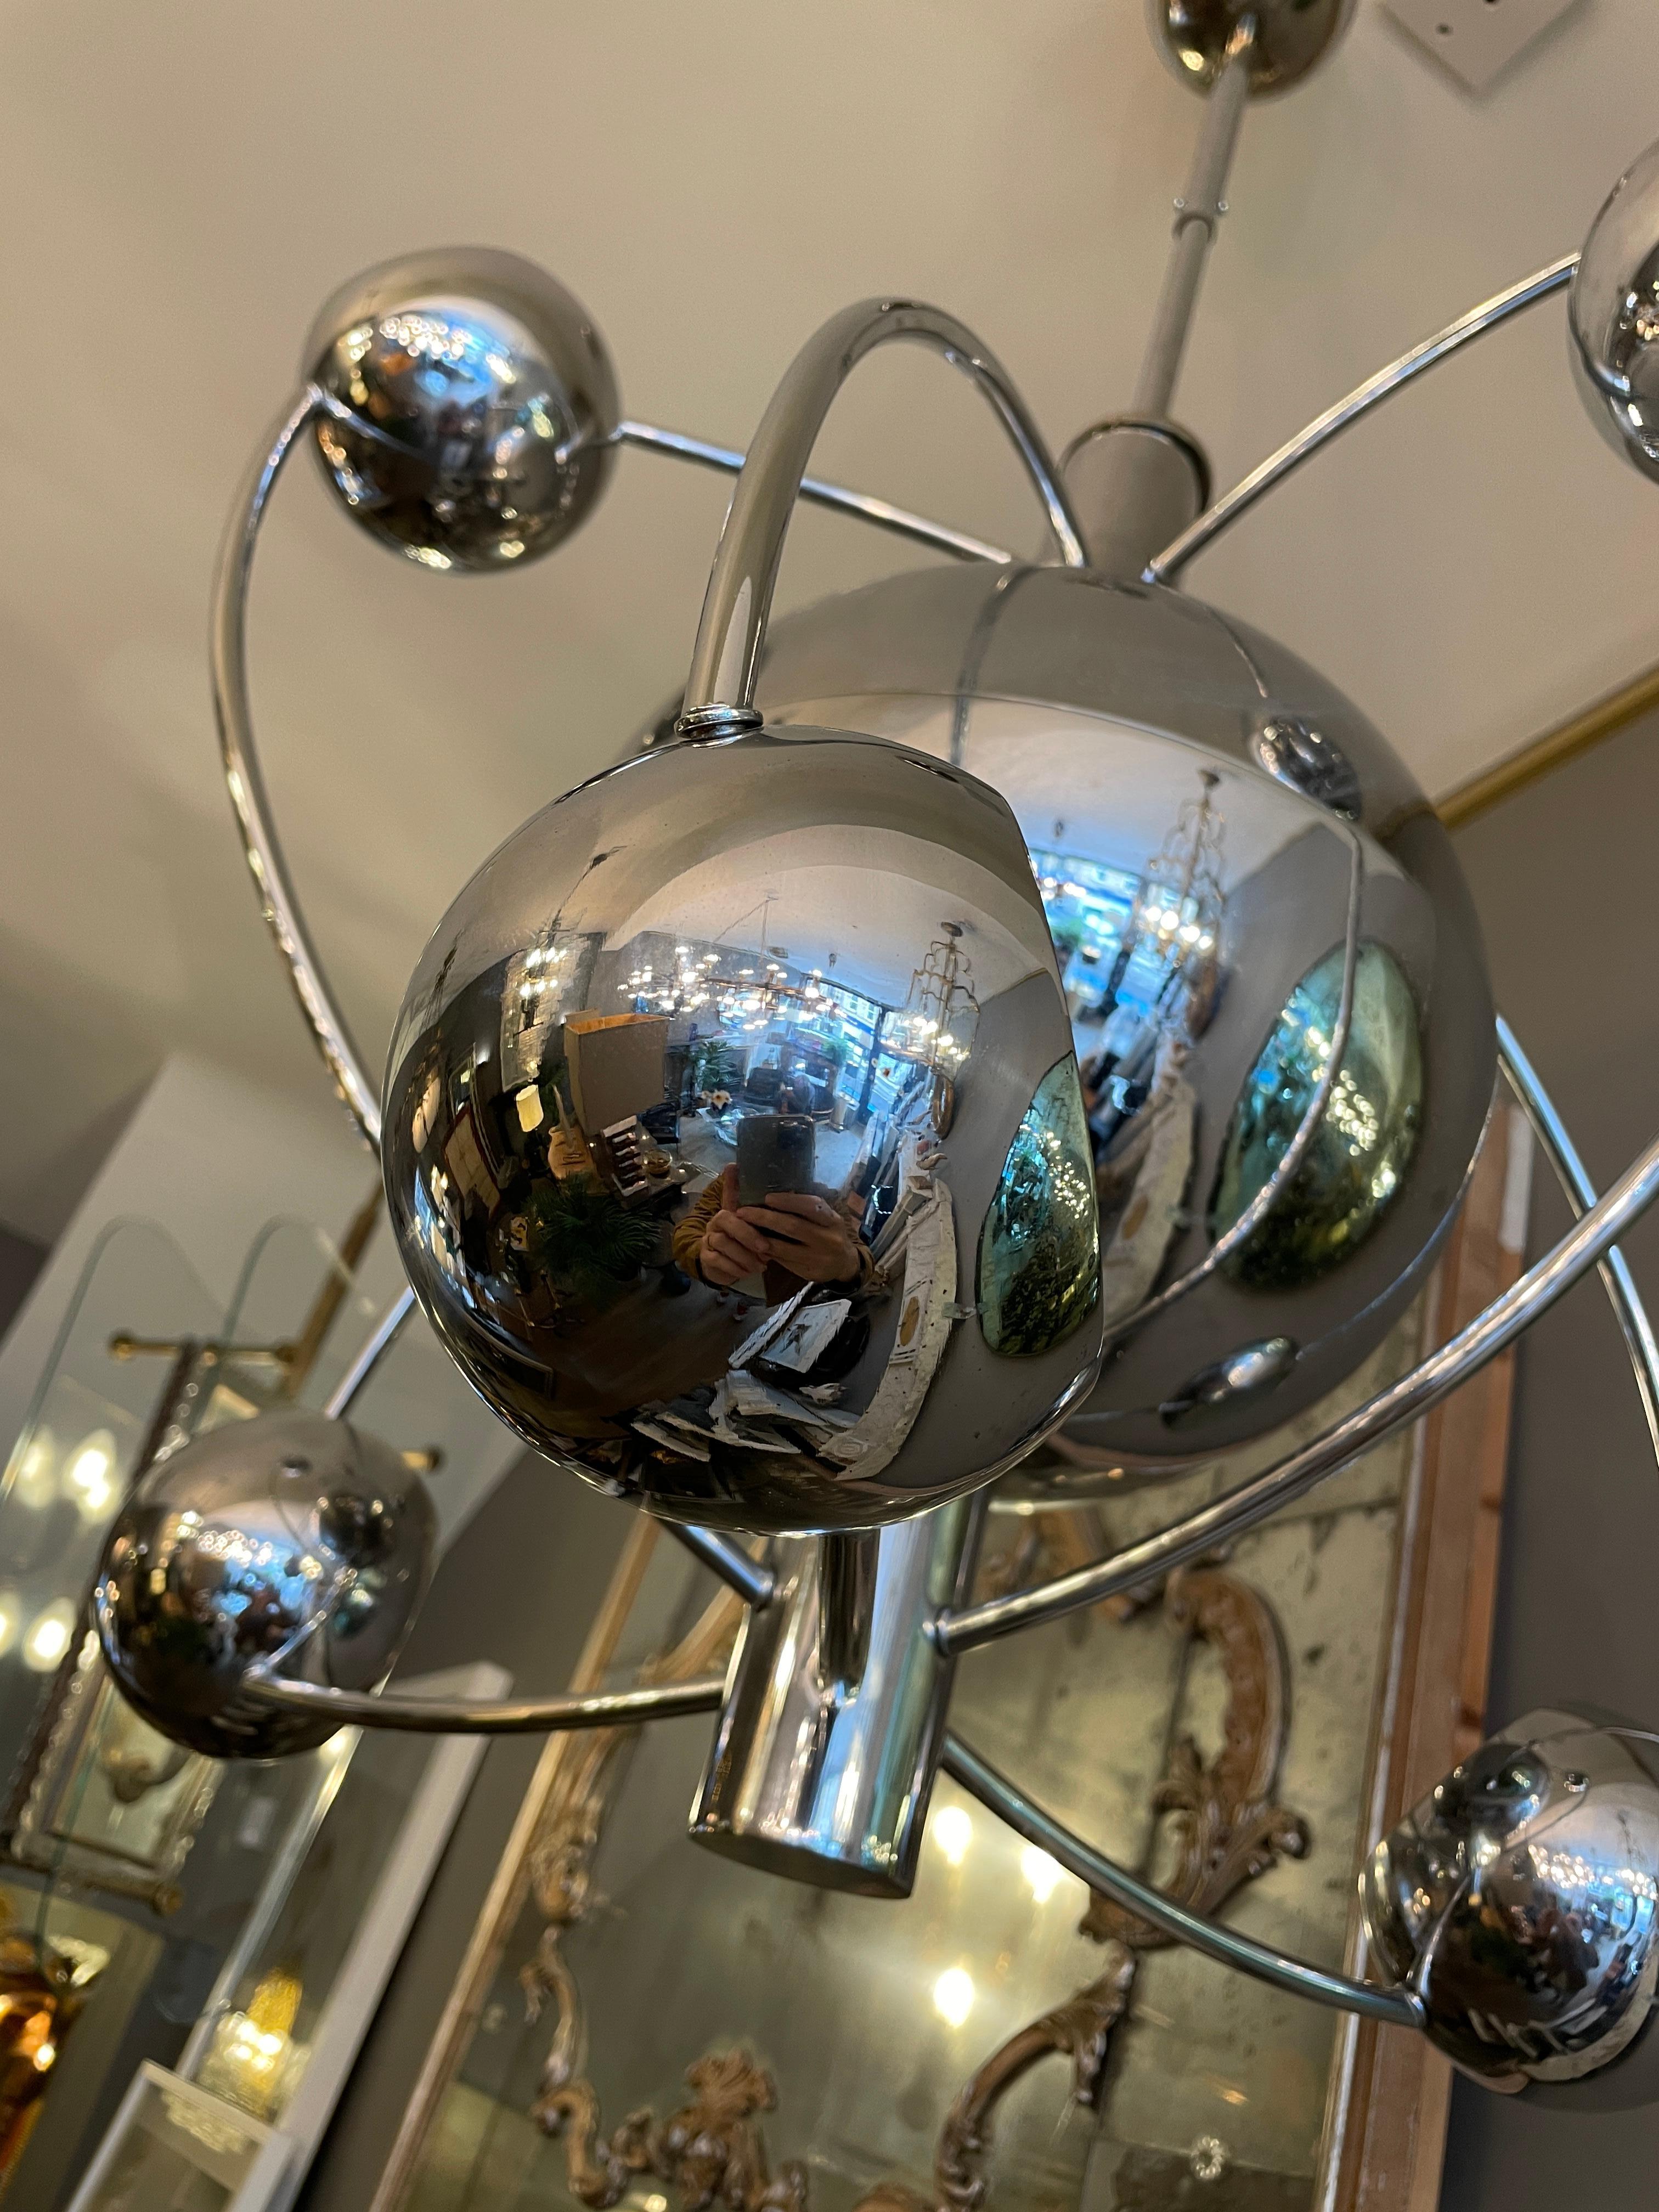 A six light satellite chrome chandelier by Goffredo Reggiani. Six round directional shades orbiting the central sphere. Italian circa 1960 . Re wired with new fittings as seen in slider images.